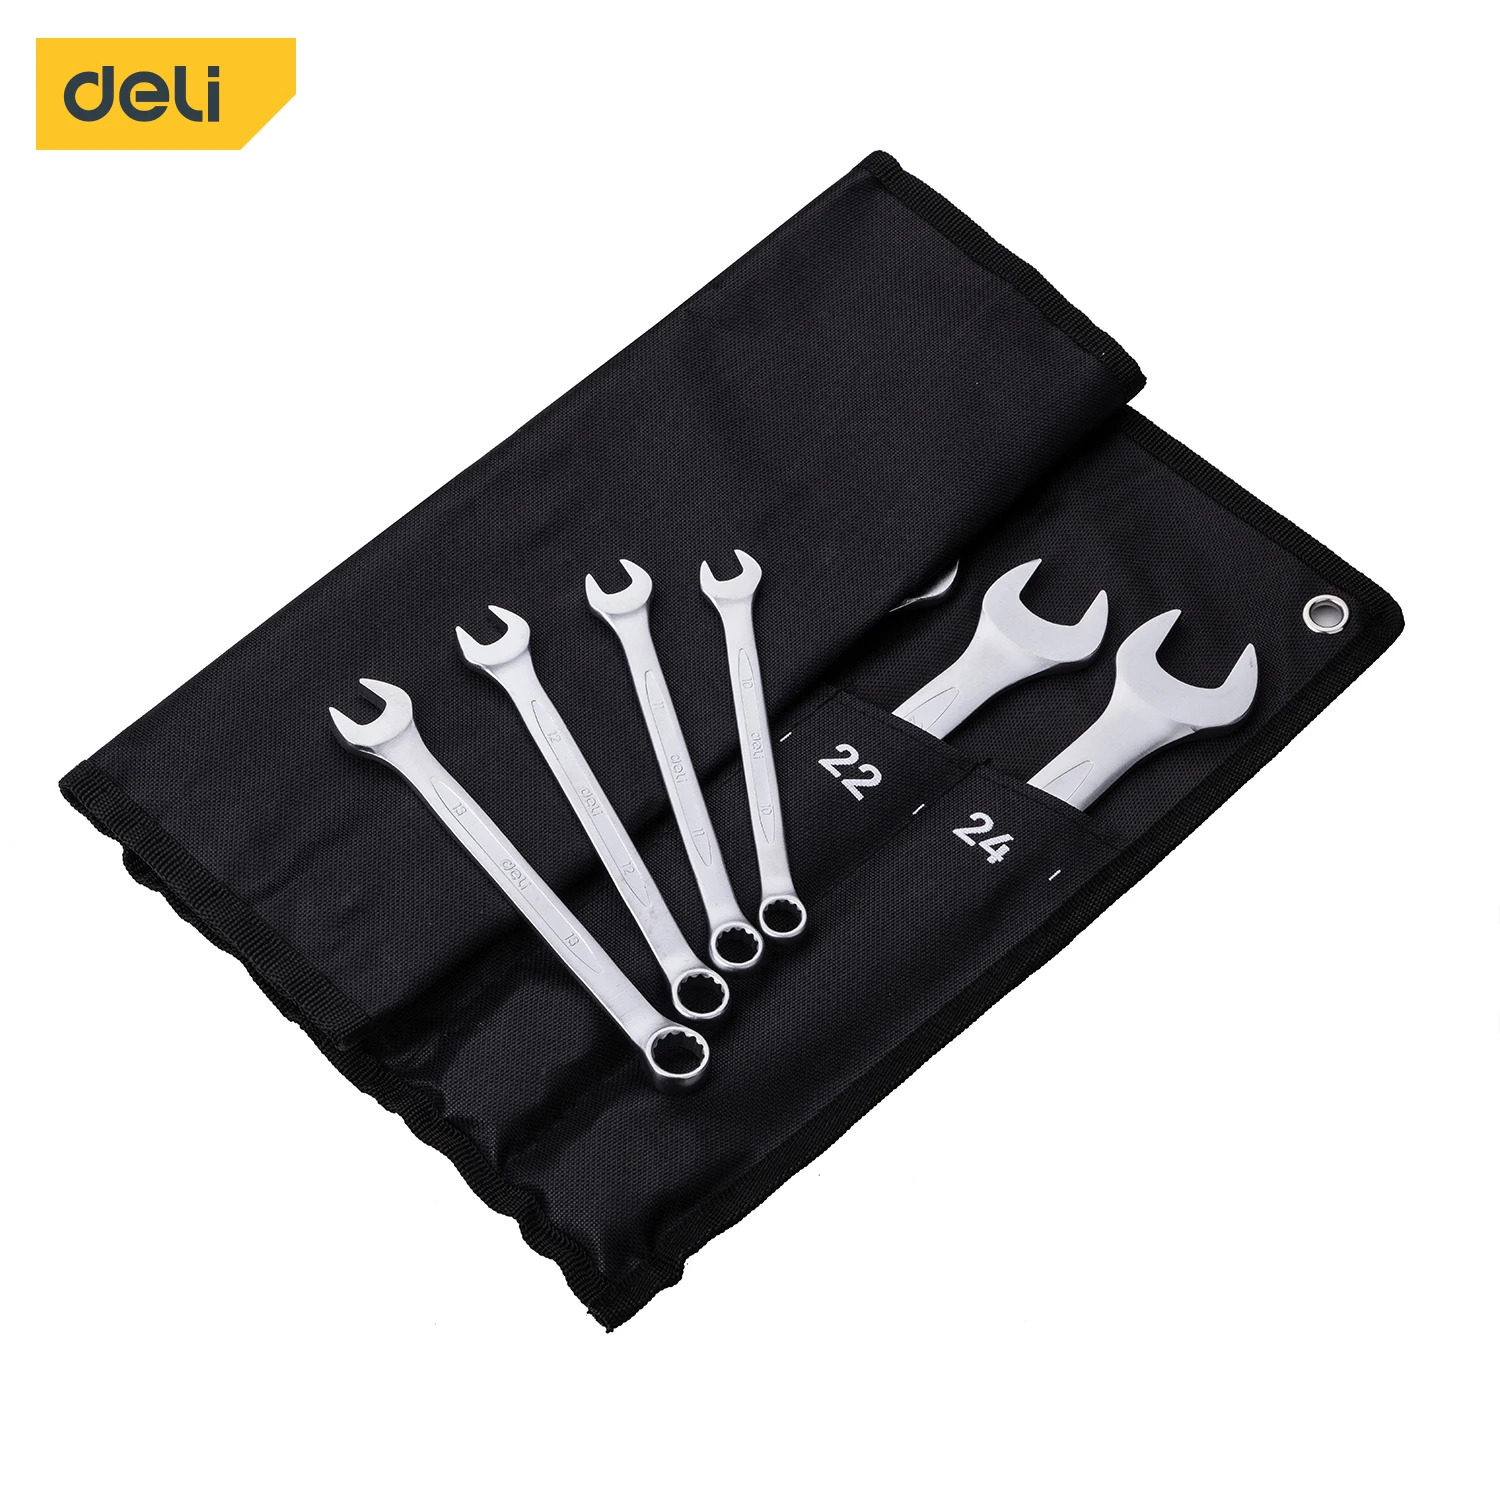 6-24mm Portable Type Combination Spanner Tool Set Deli Combination Ended Spanner Key Wrench kits for Repair Spanner Hand Tool